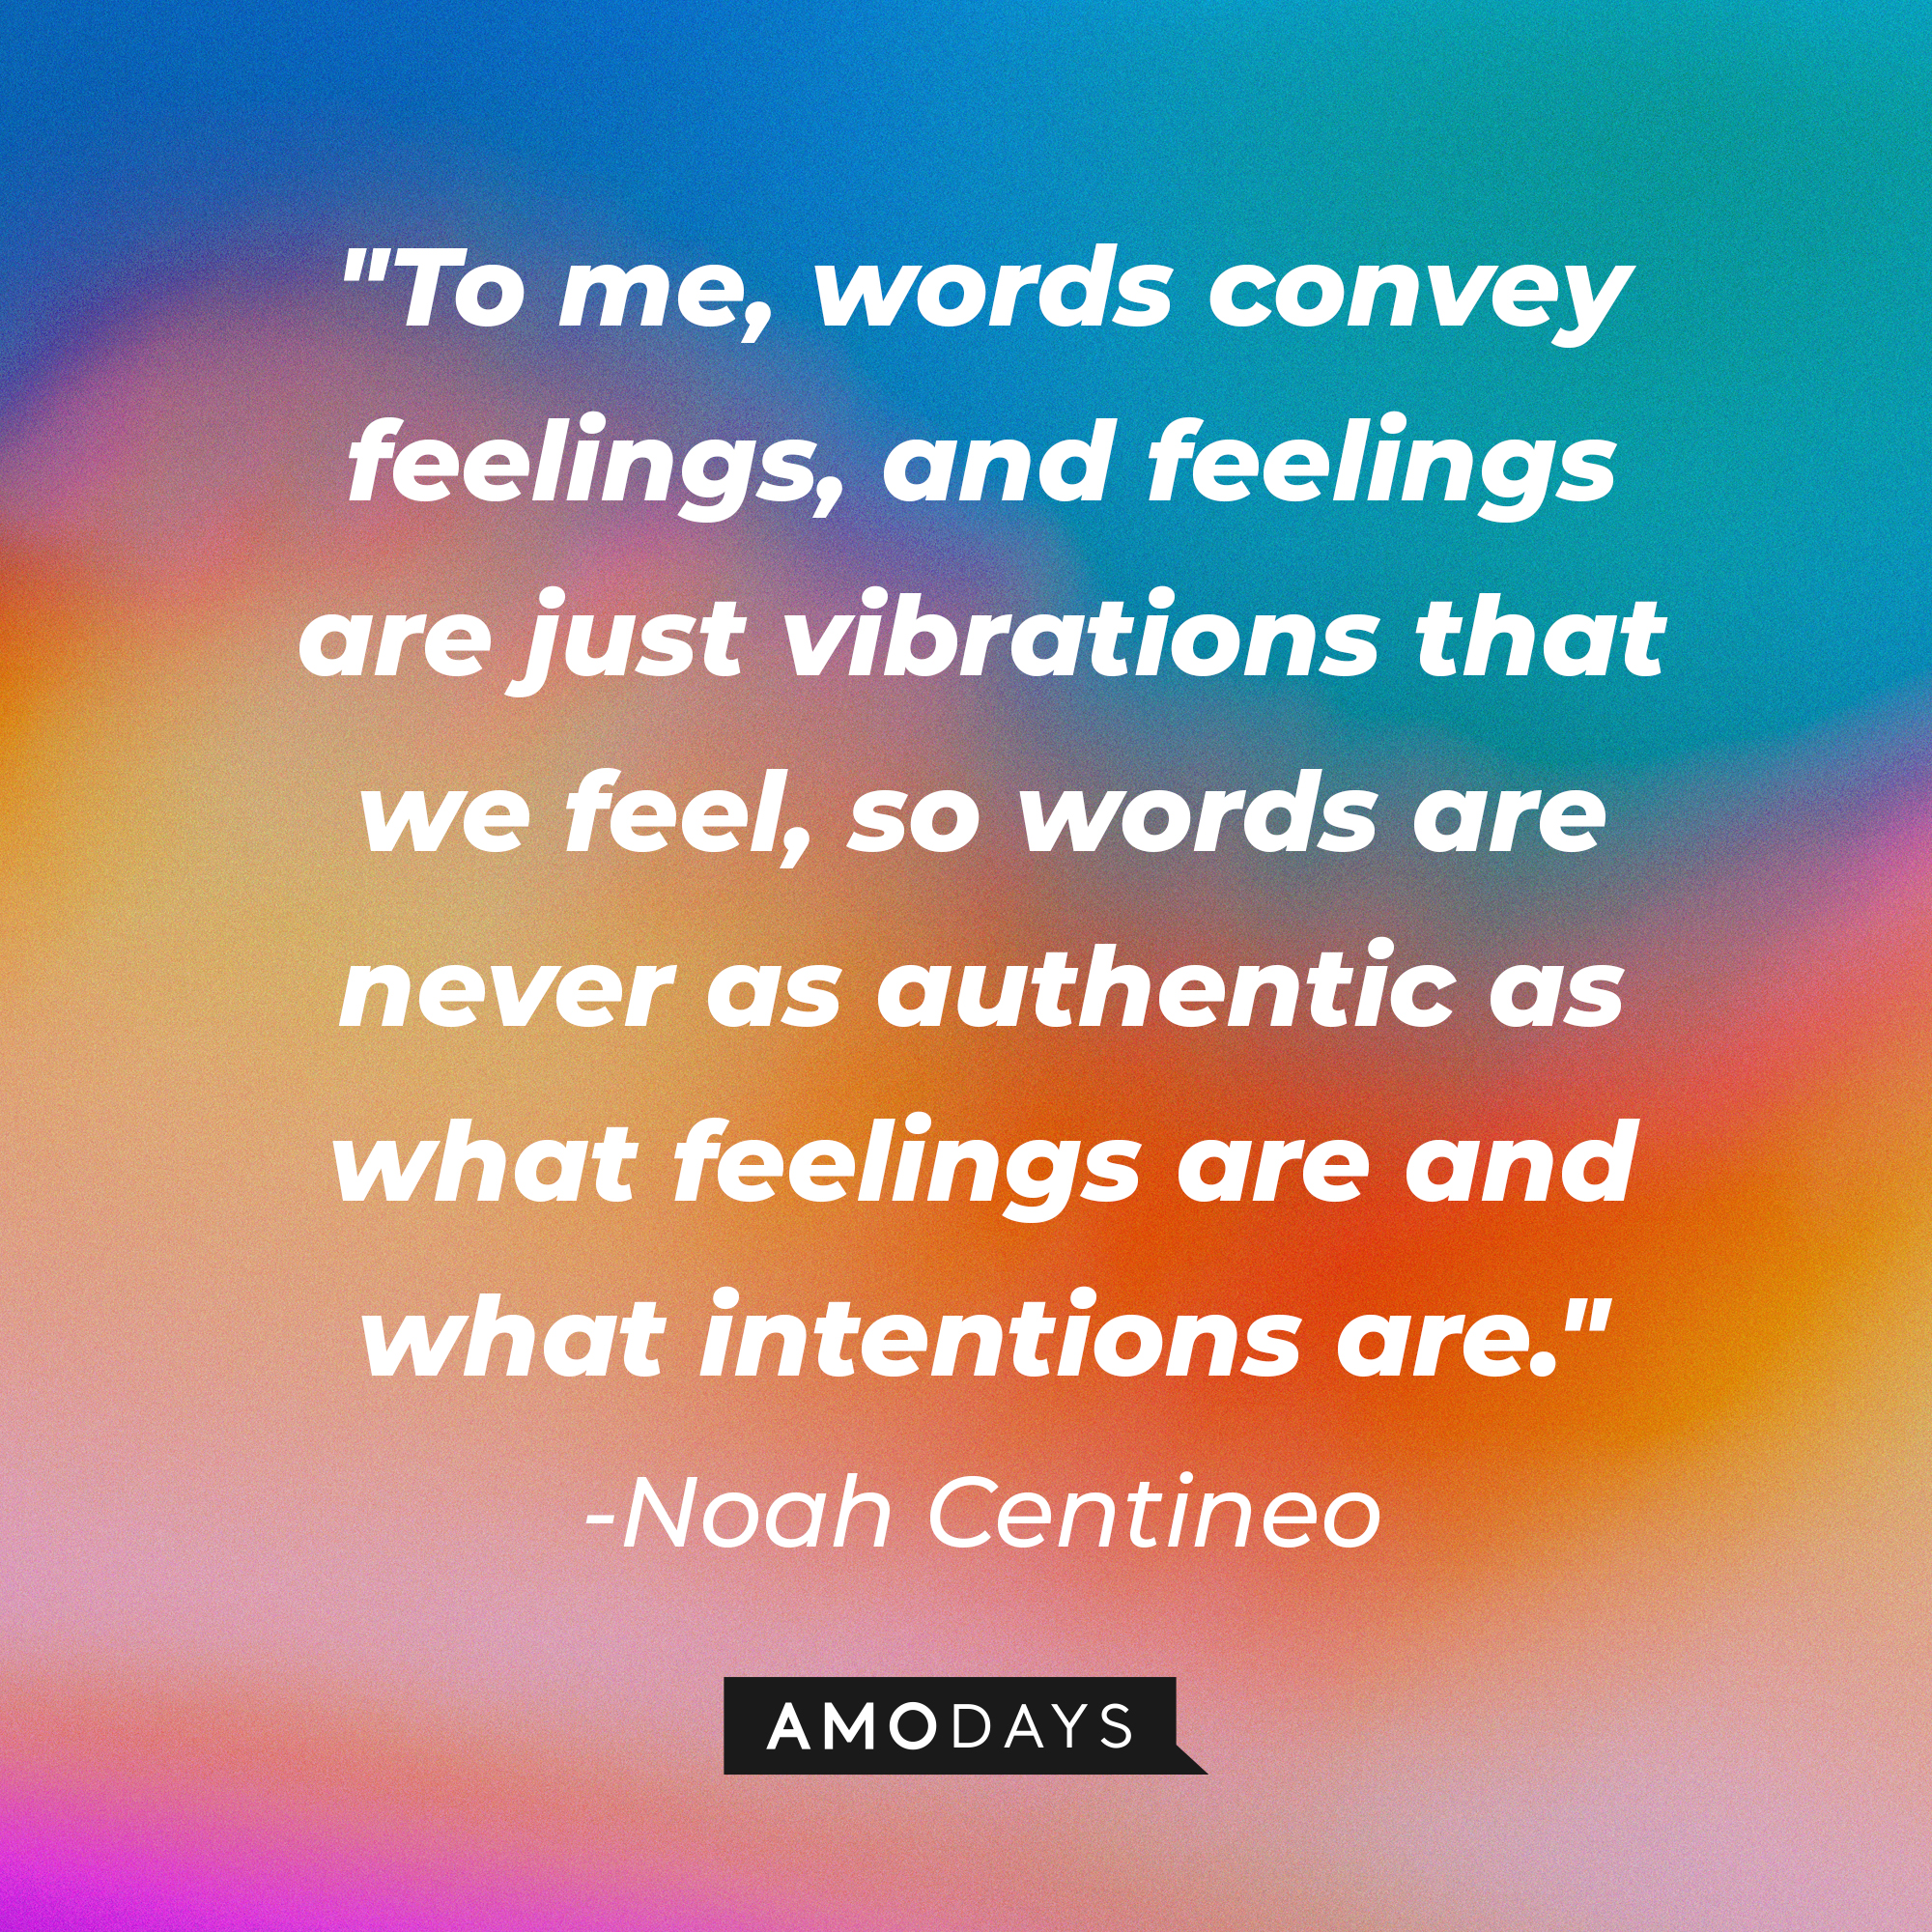 Noah Centineo's quote: "To me, words convey feelings, and feelings are just vibrations that we feel, so words are never as authentic as what feelings are and what intentions are." | Image: AmoDays